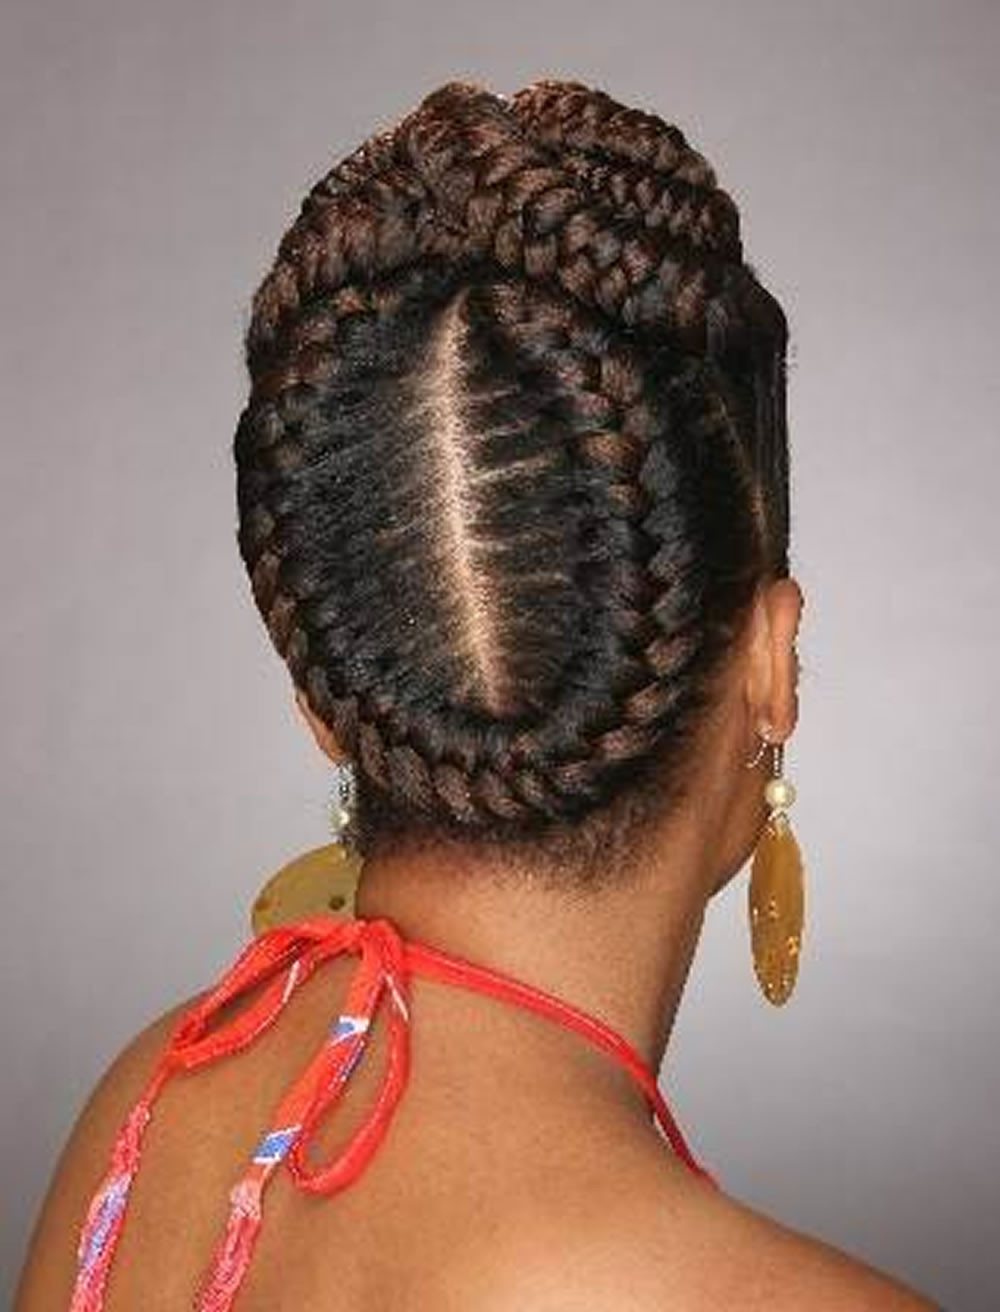 Pictures Of Updo Cornrow Hairstyles
 20 Best African American Braided Hairstyles for Women 2020